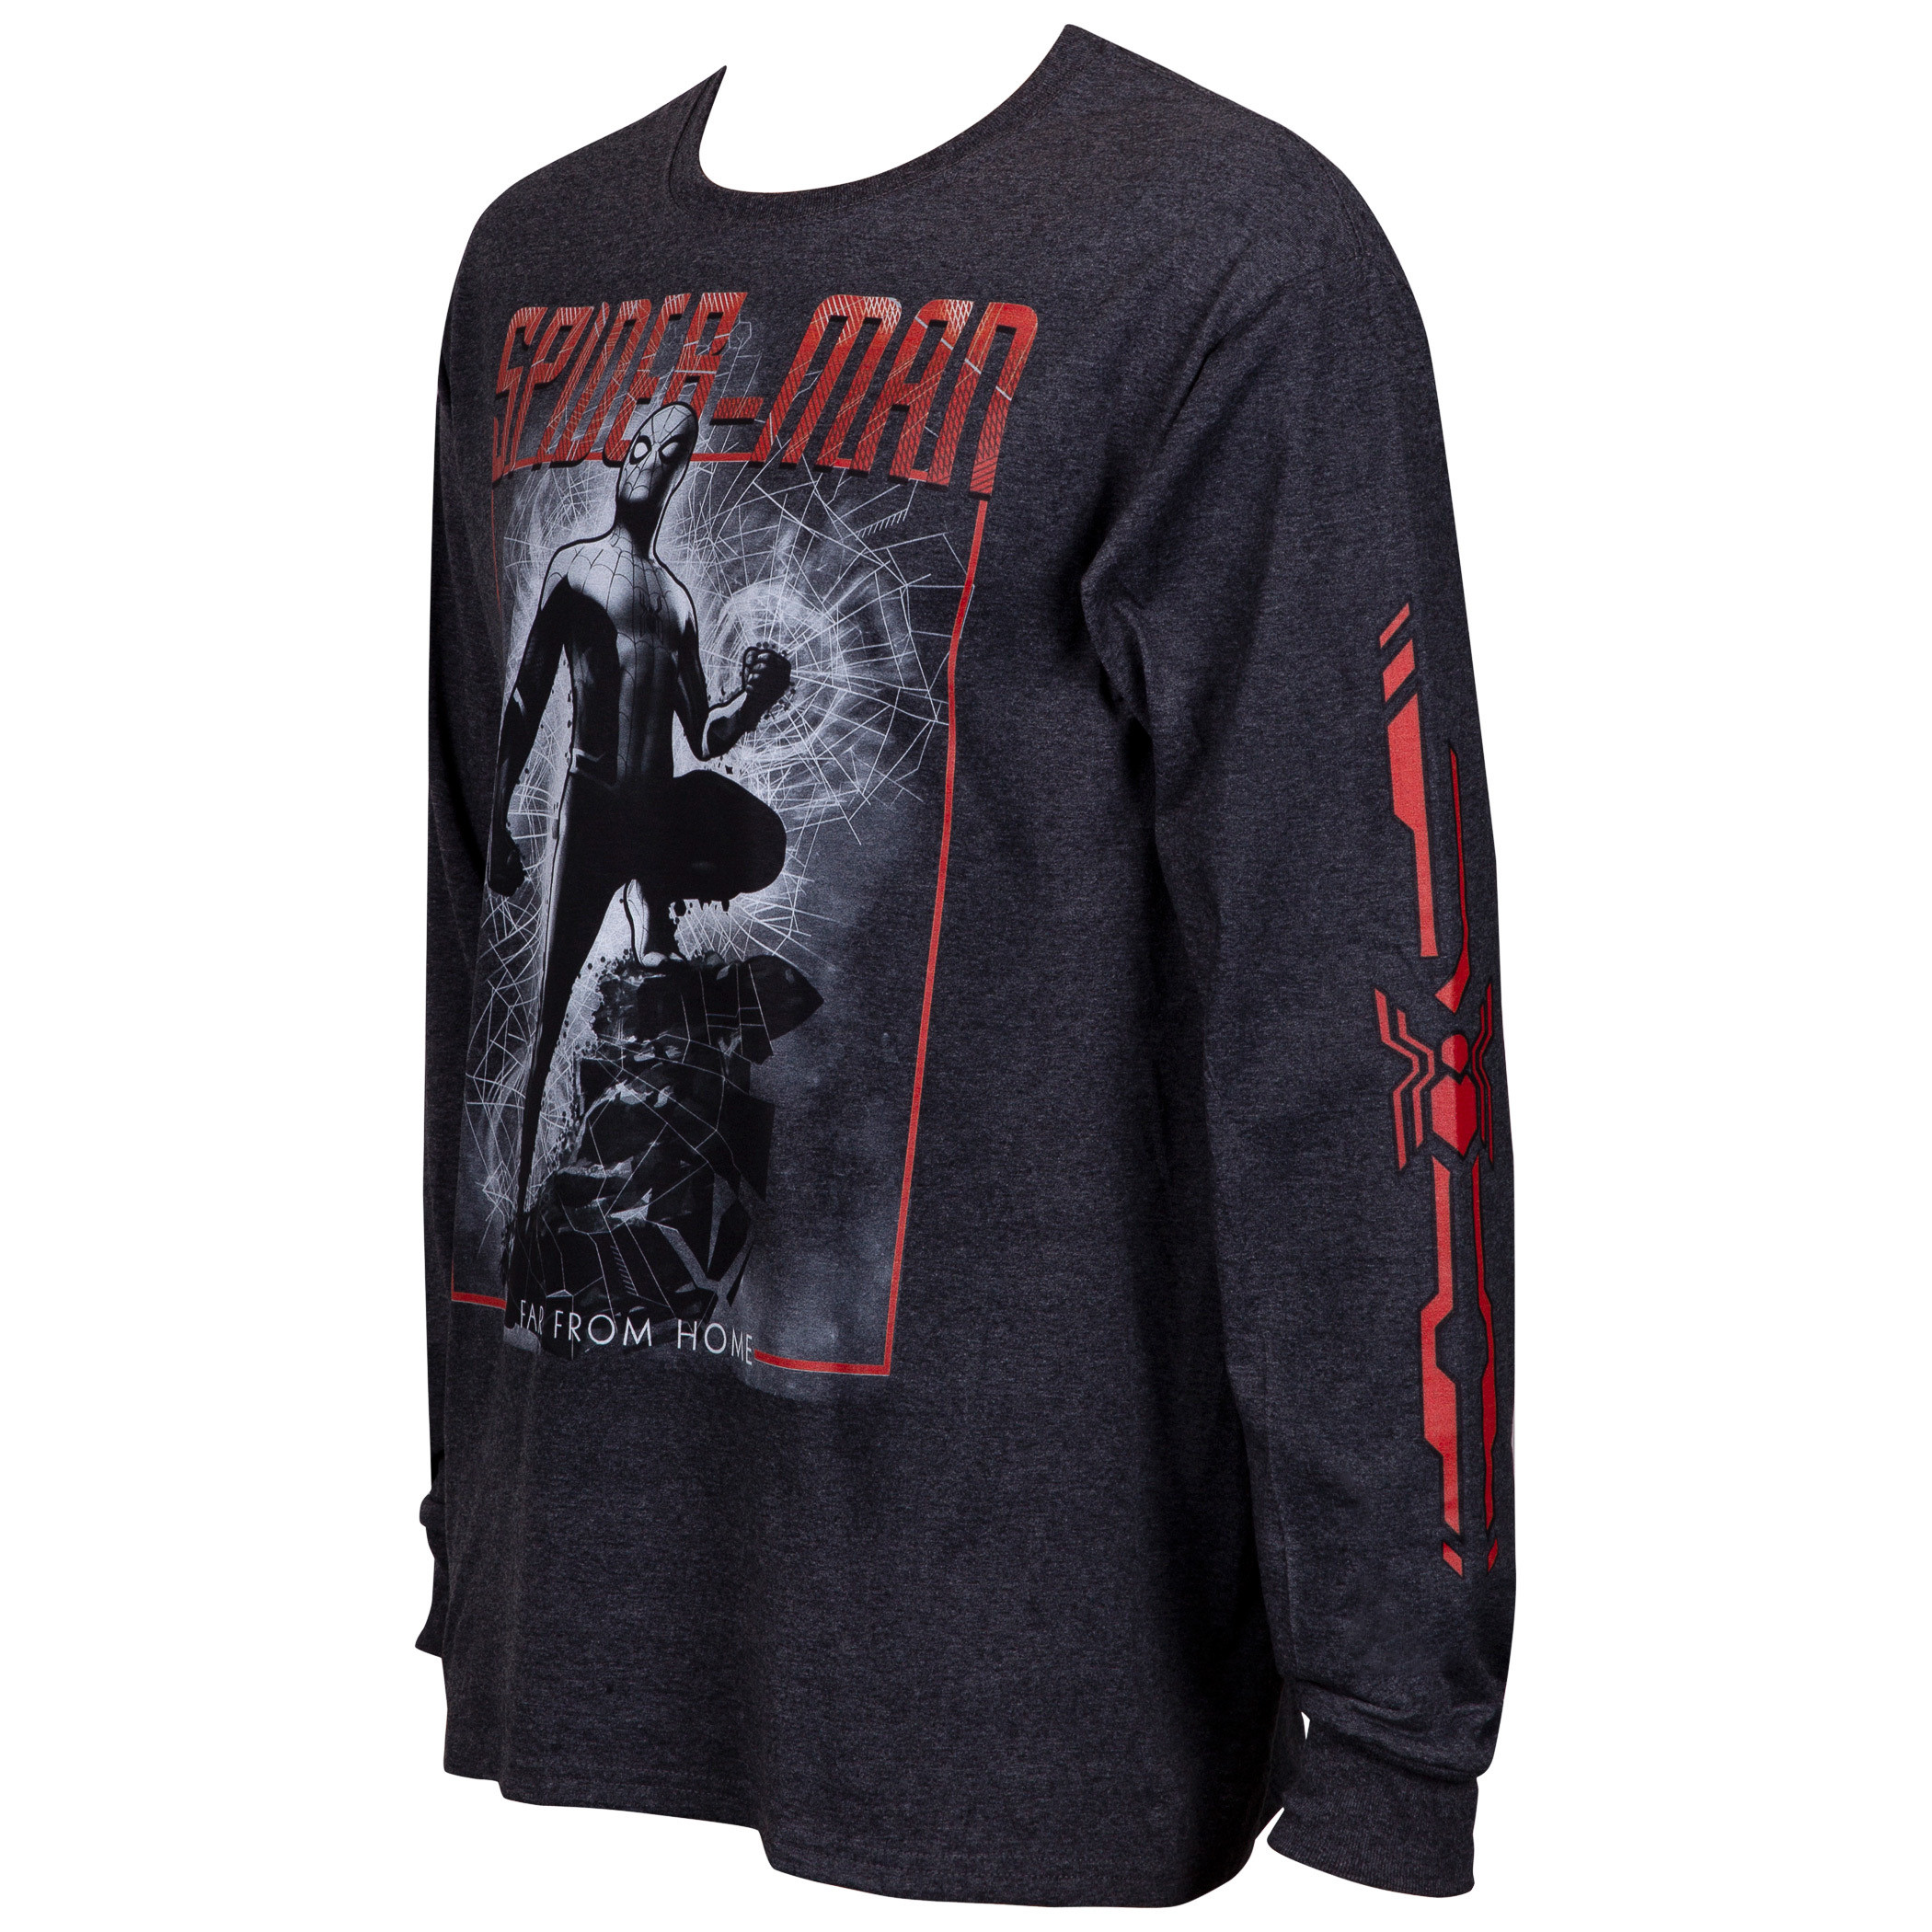 Spider-Man Far From Home Long Sleeve Shirt with Sleeve Print